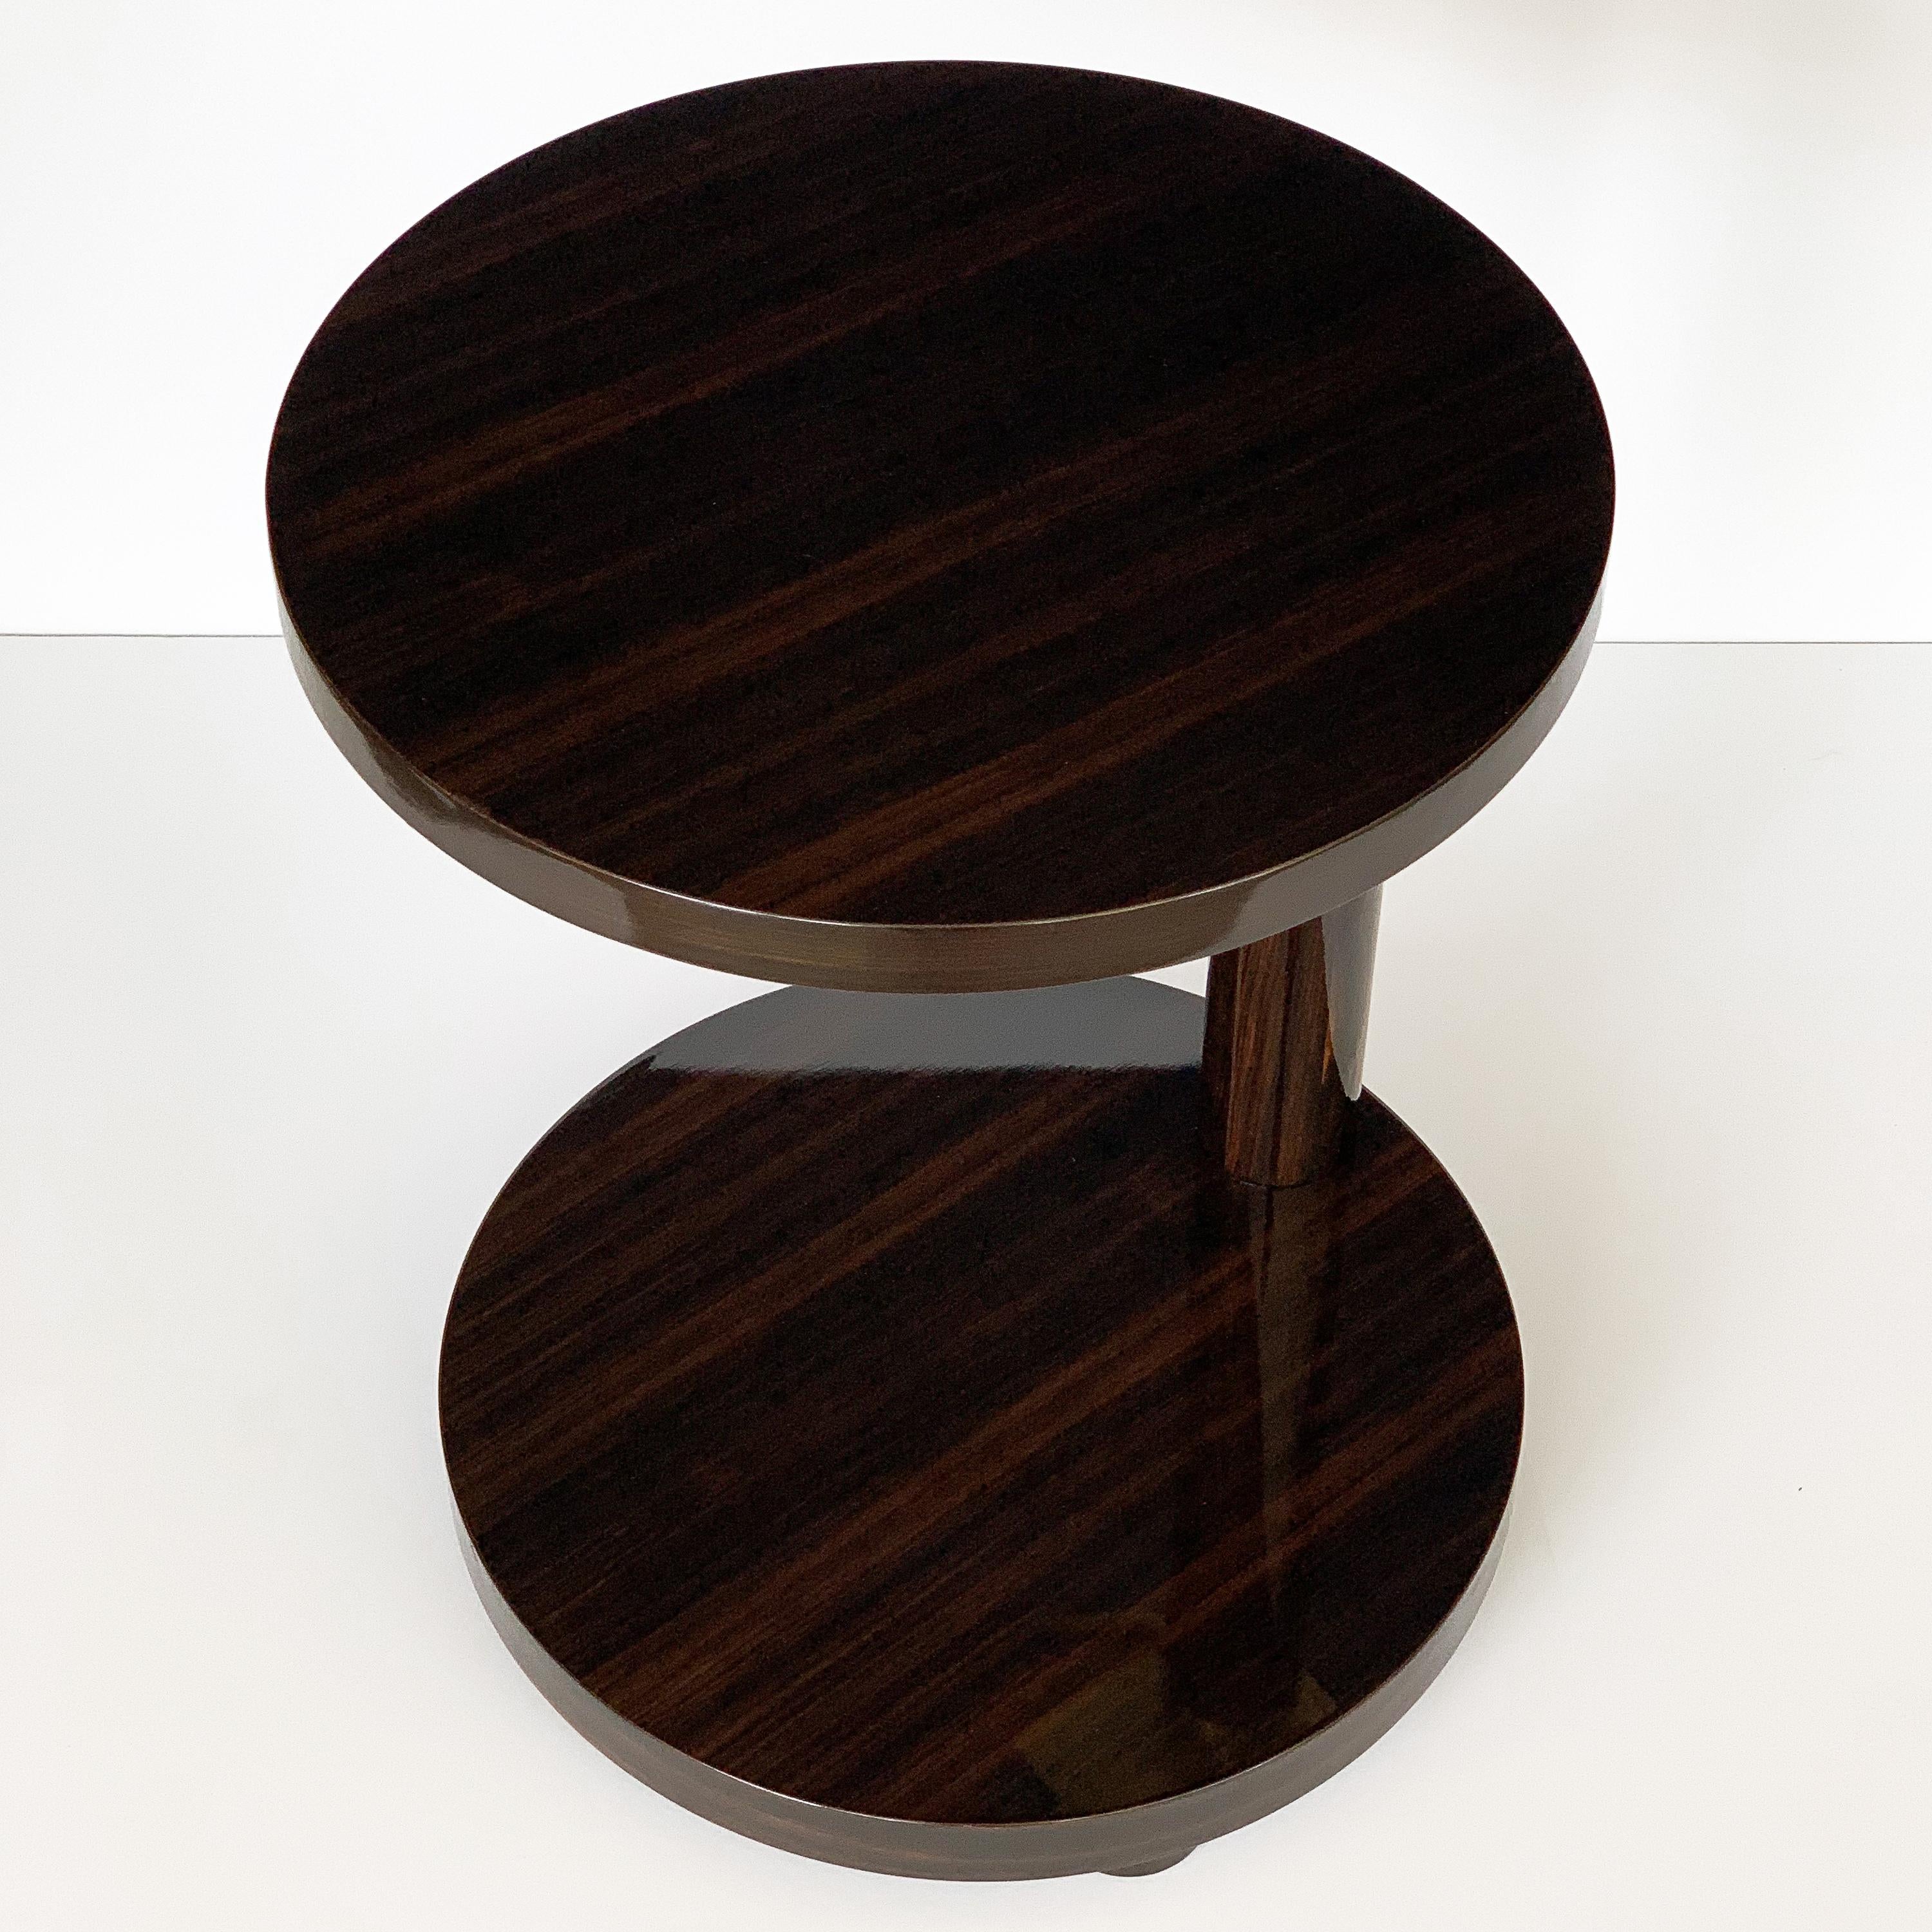 20th Century Deco Style Macassar Ebony Adjustable Side Table by Hugues Chevalier